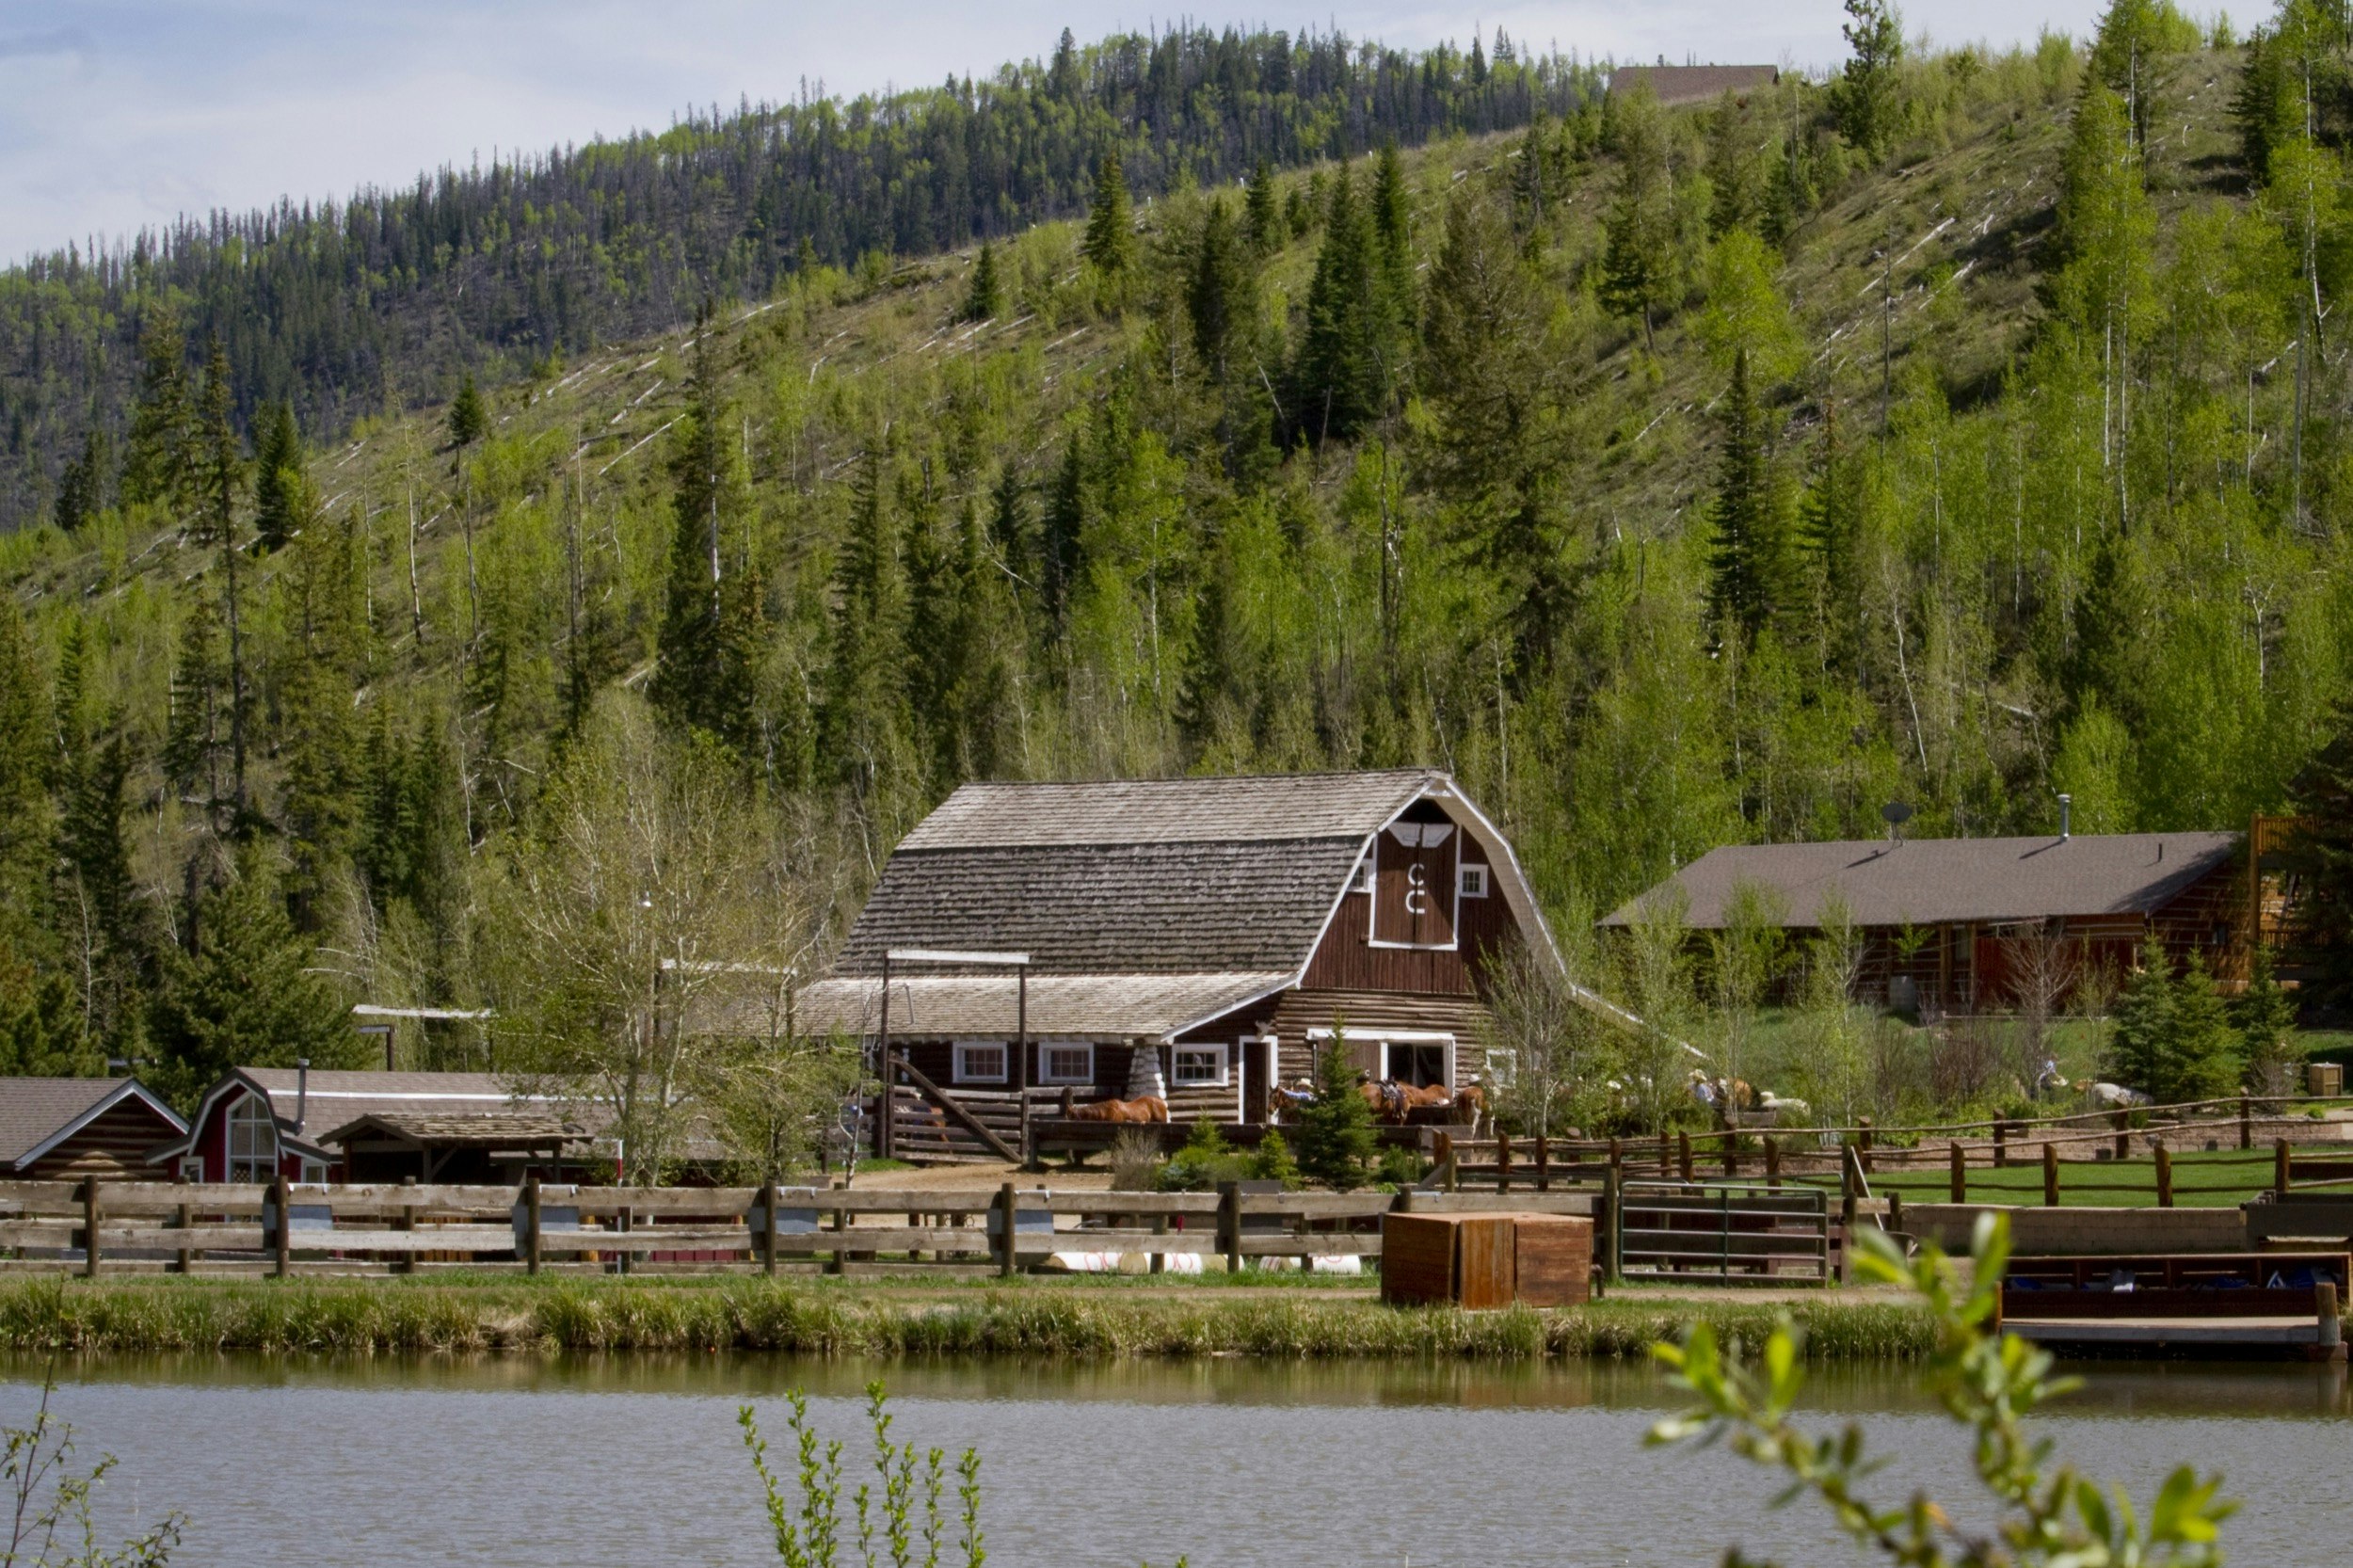 The Barn at C Lazy U ranch has is surrounded by tack and other equestrian gear and nestled in the mountains of Colorado